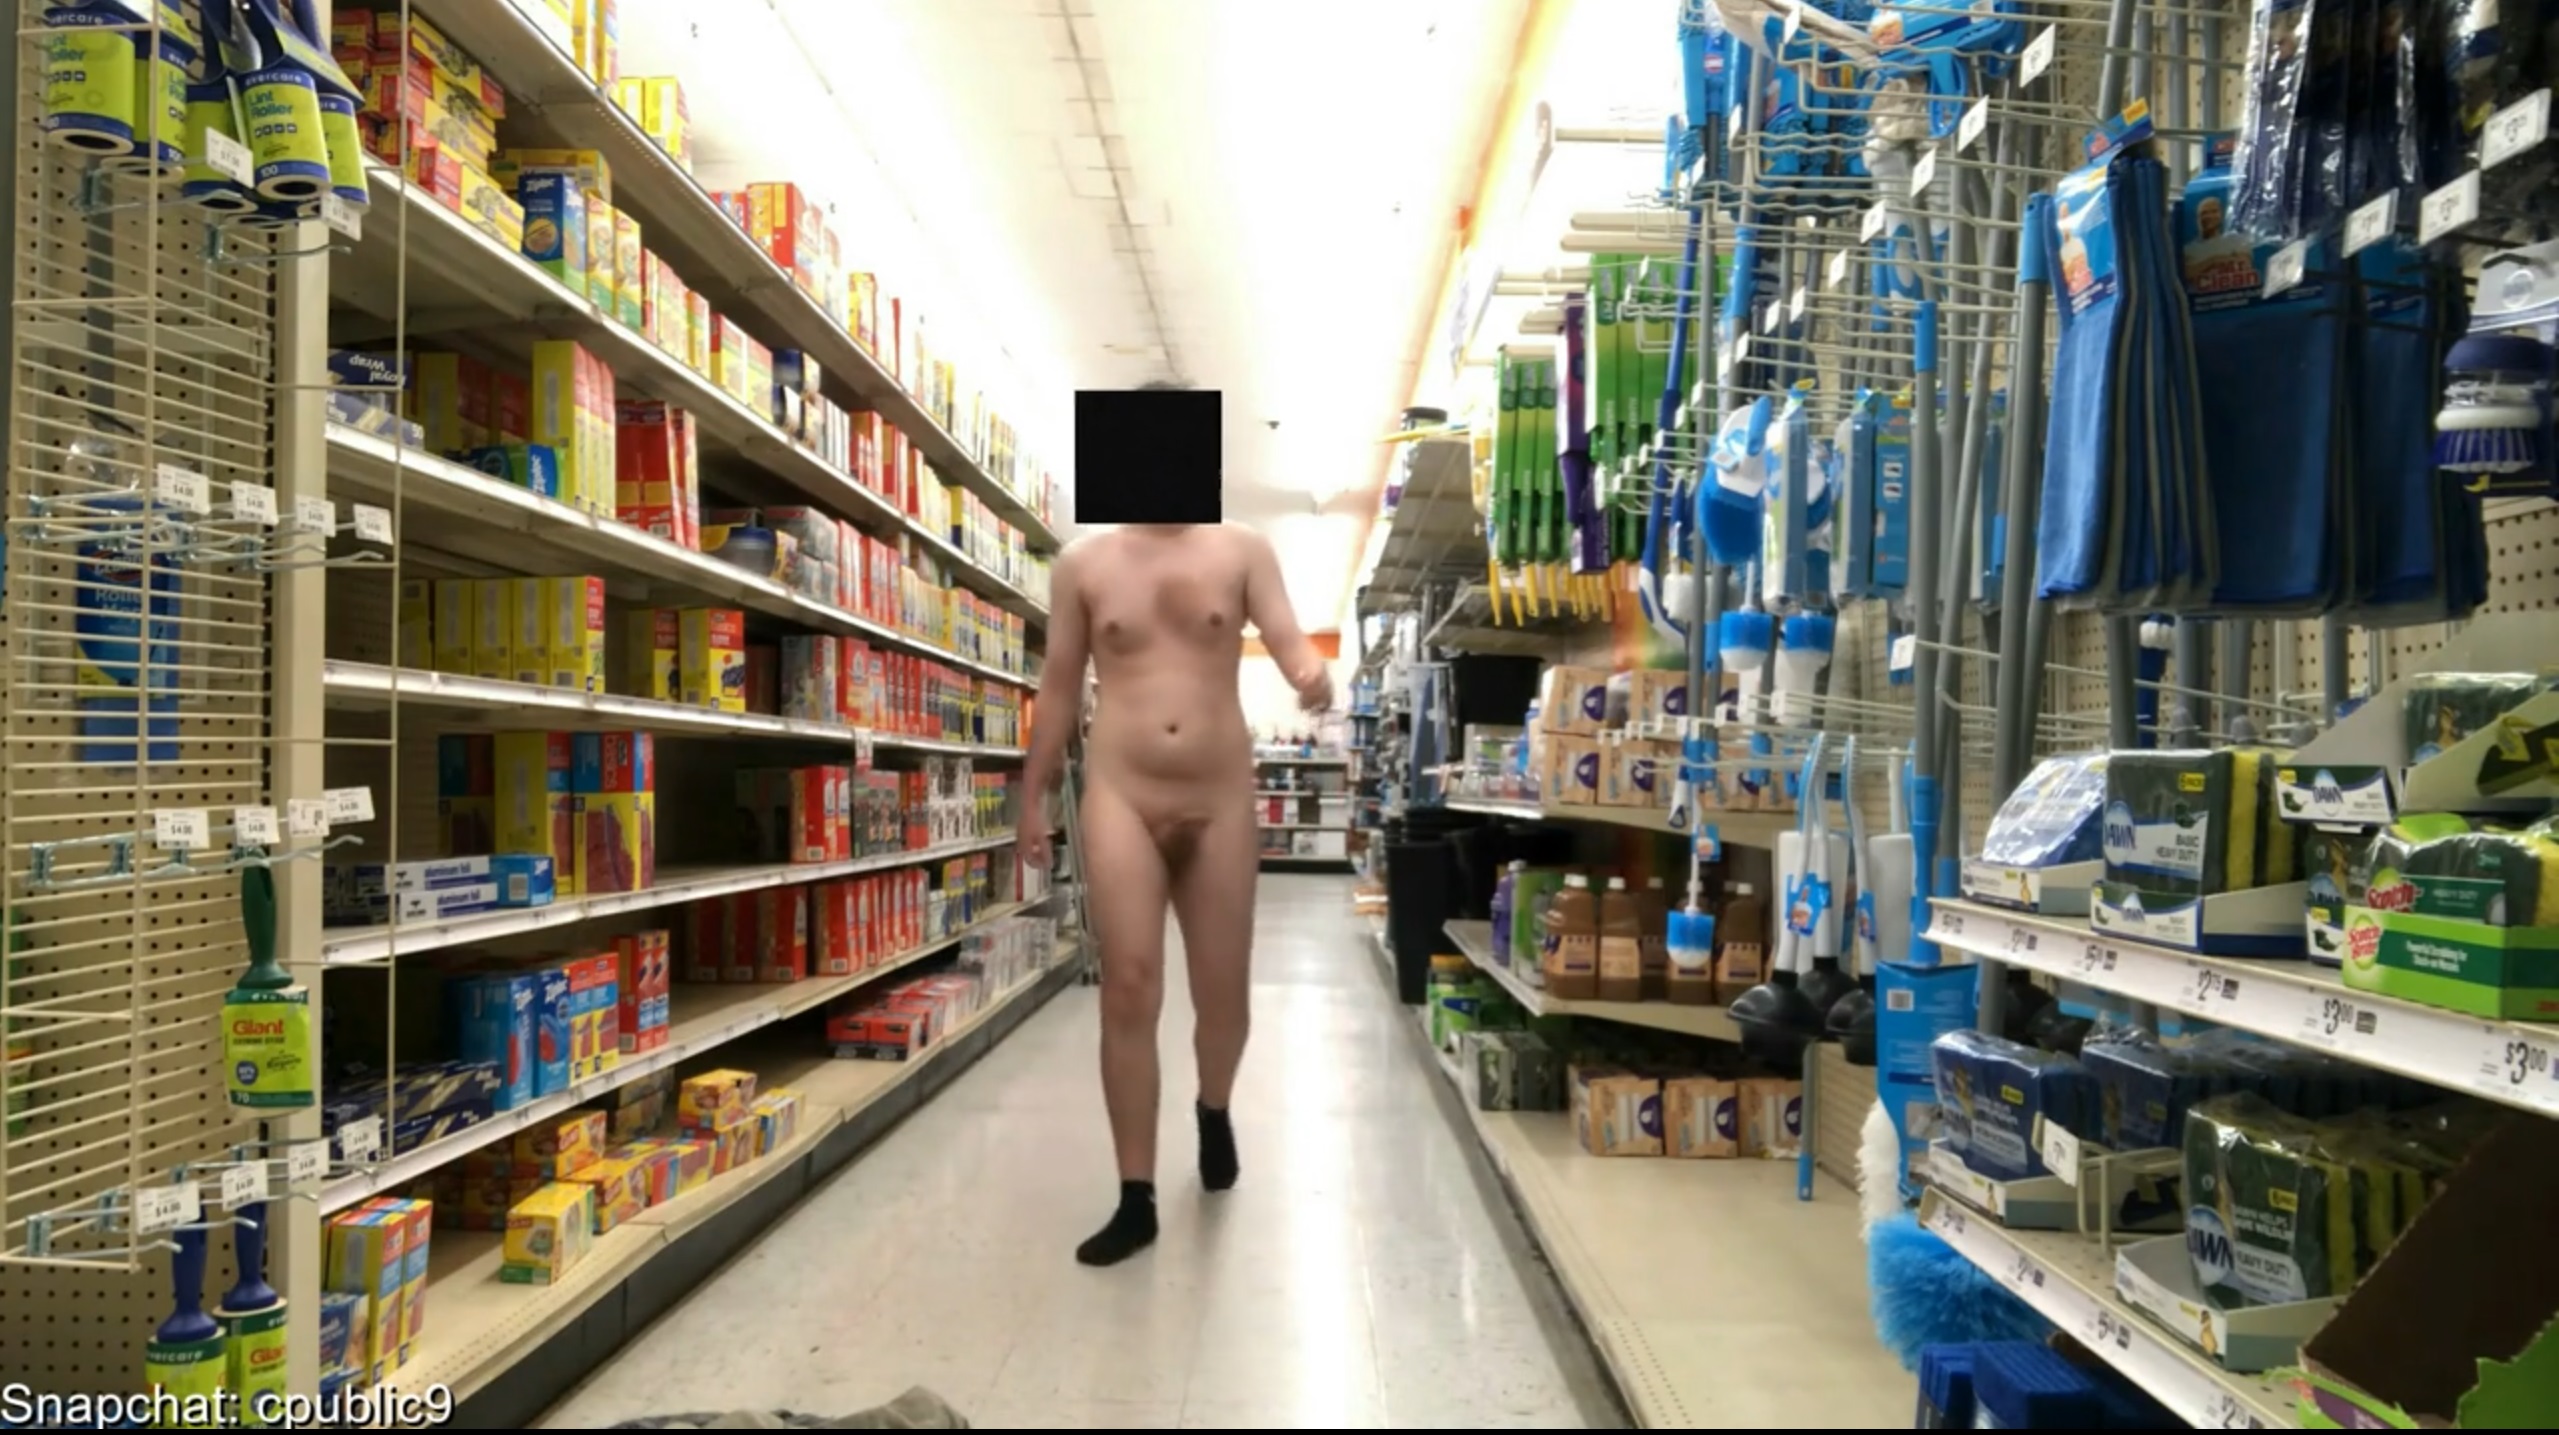 Caught flashing people and cuming in a store